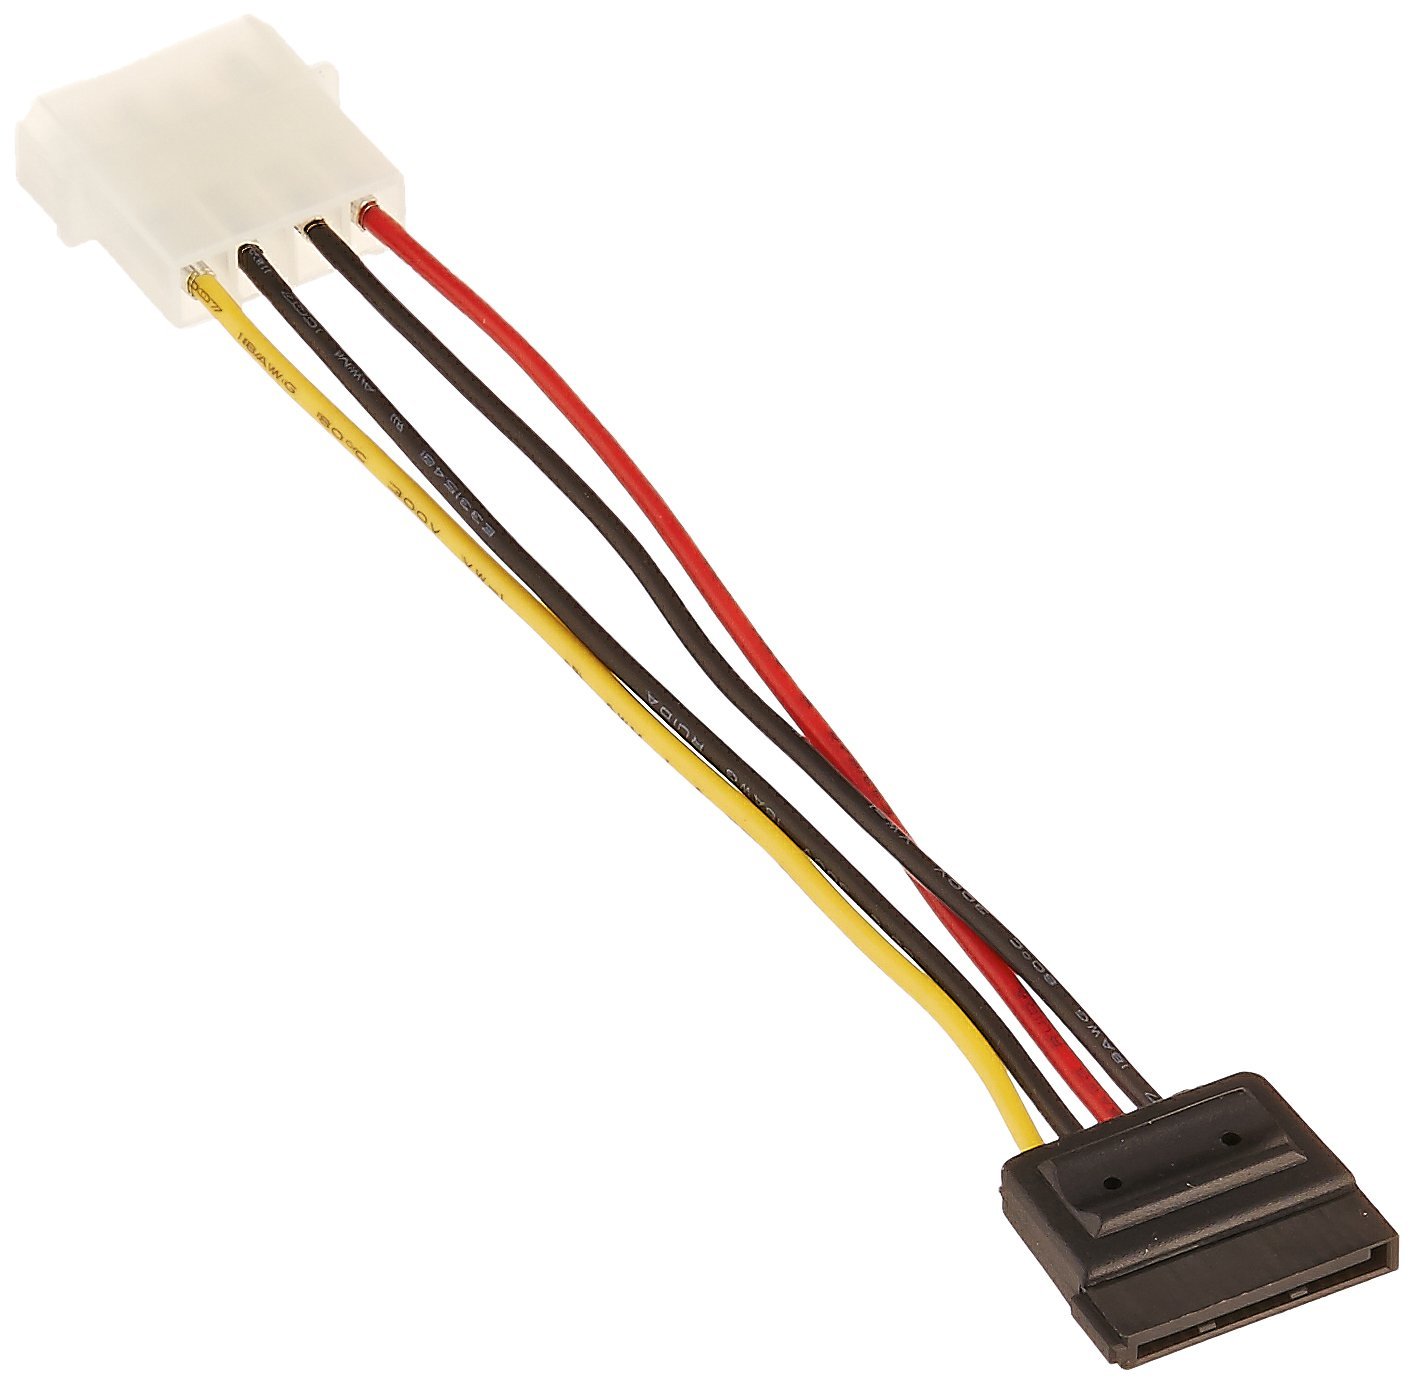 STARTECH 6IN 4 PIN MOLEX TO SATA POWER CABLE ADAPTER (SATAPOWADAP)